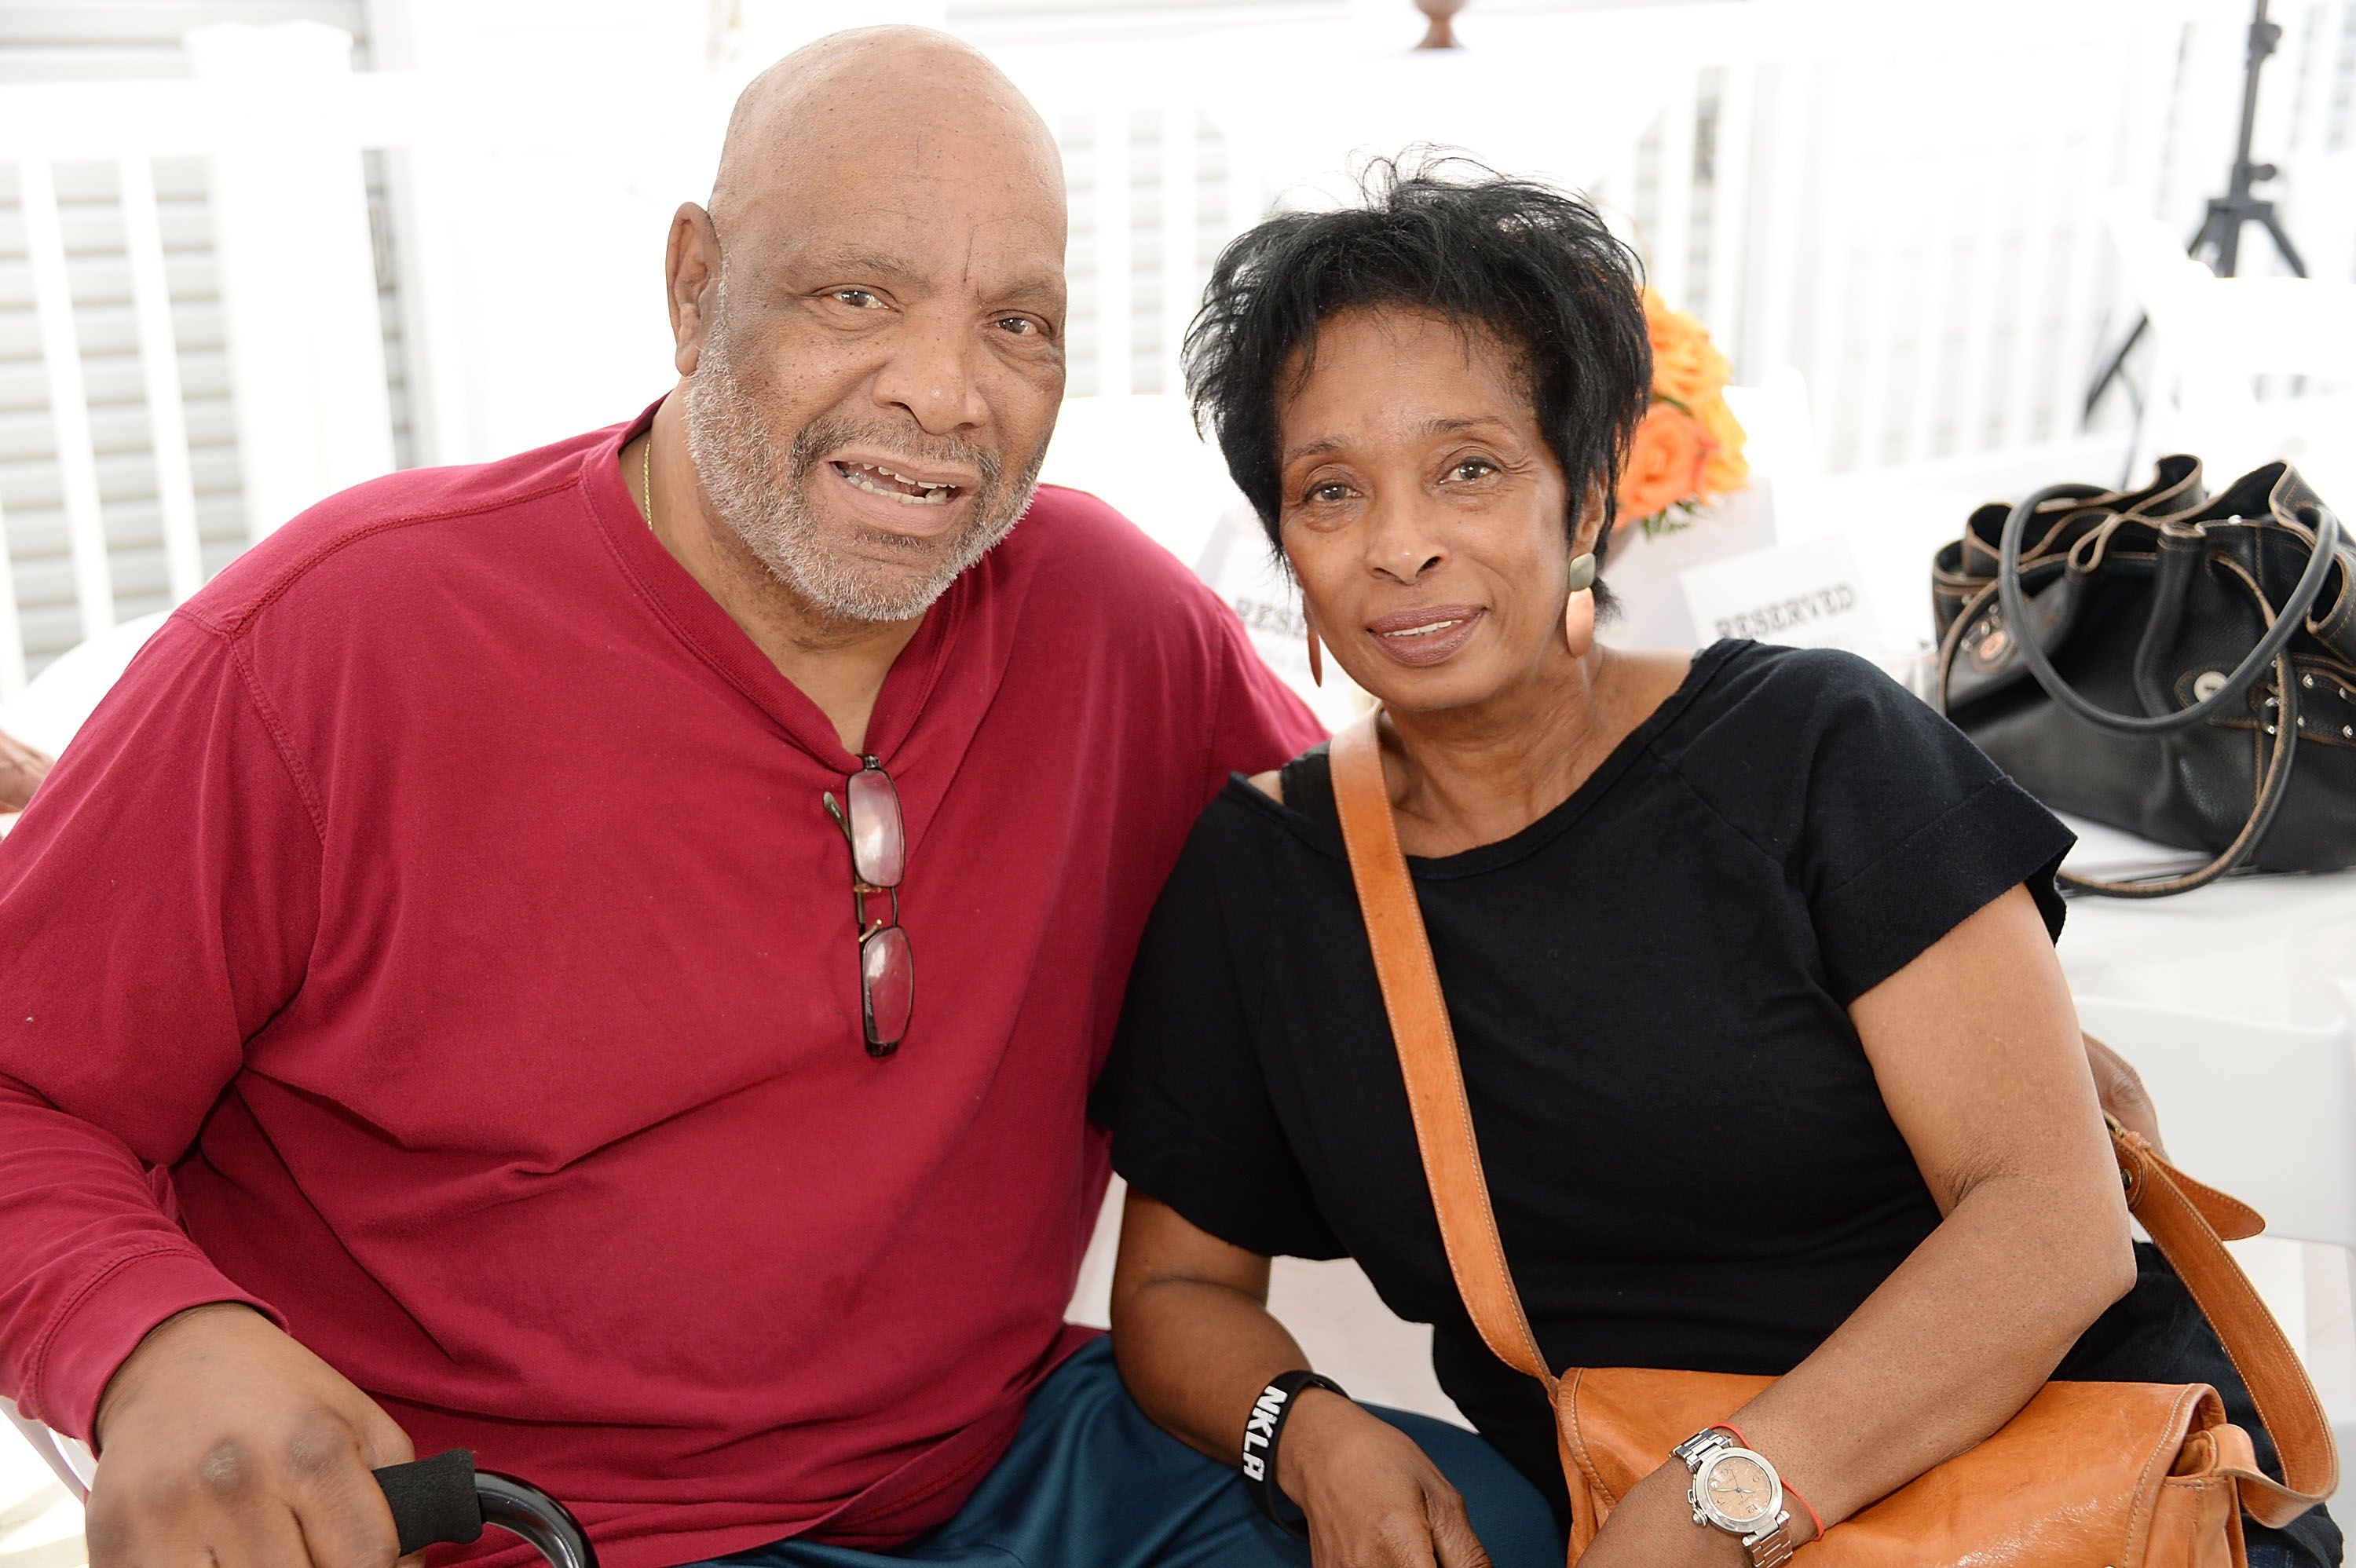 Actor James Avery and wife Barbara Avery attend the NKLA Pet Adoption Center ribbon cutting and celebrity/donor brunch at the NKLA Pet Adoption Center on August 11, 2013. | Photo: Getty Images